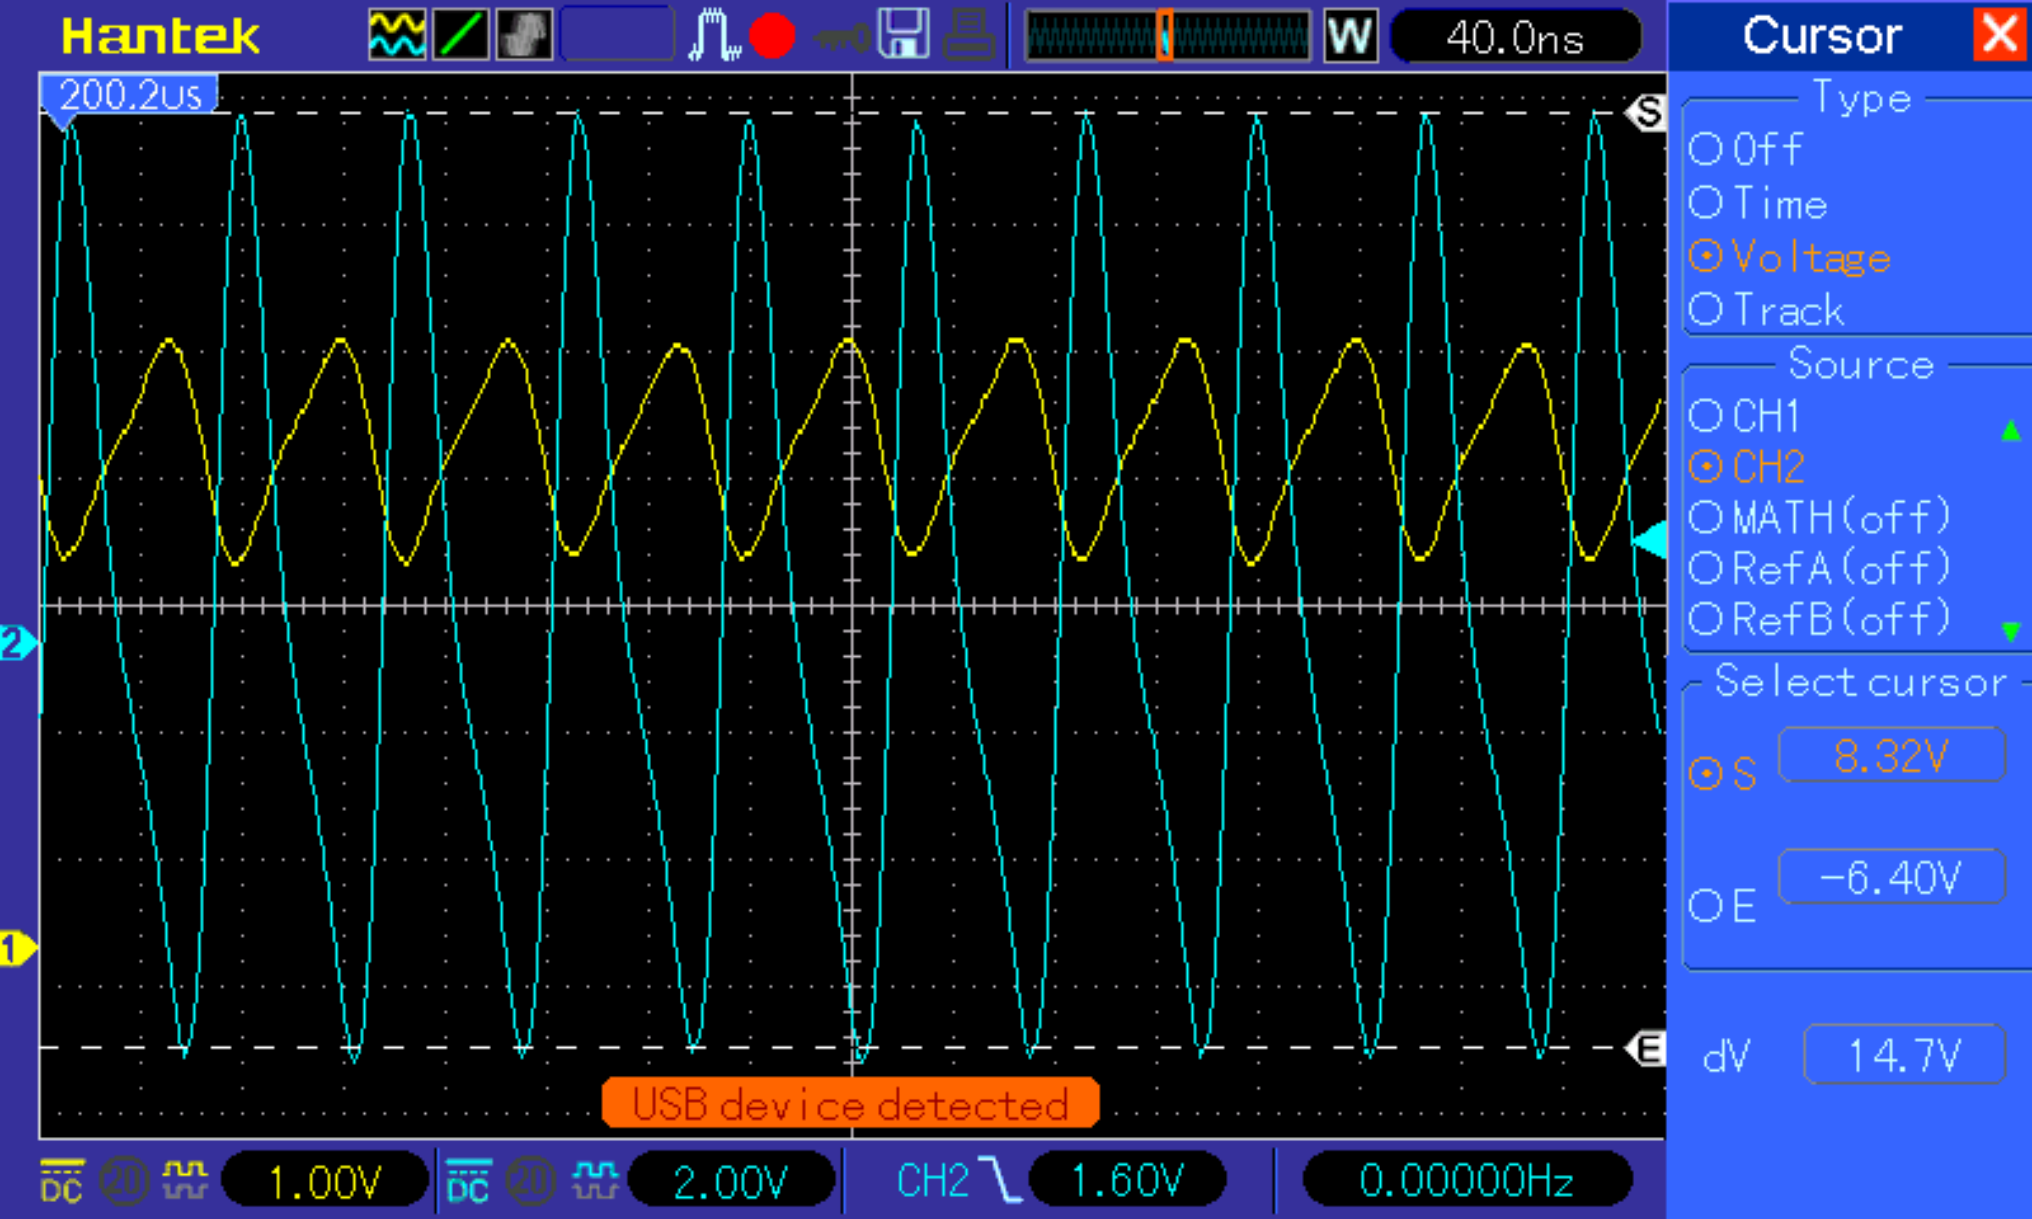 Output of the amplifier